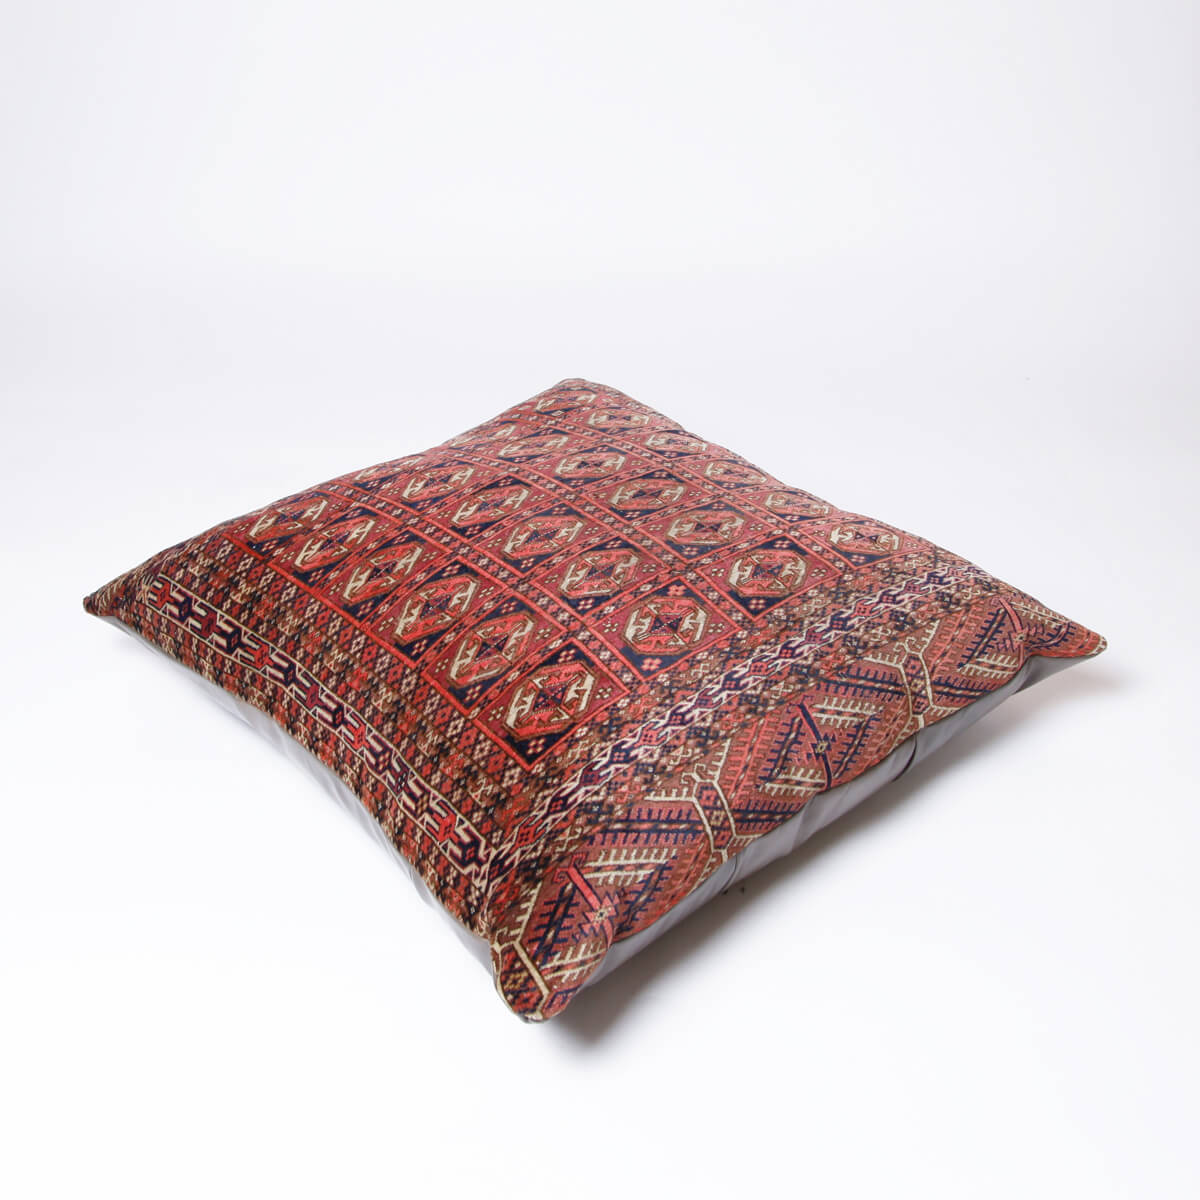 Large Persian Balouch and Leather Floor Cushion